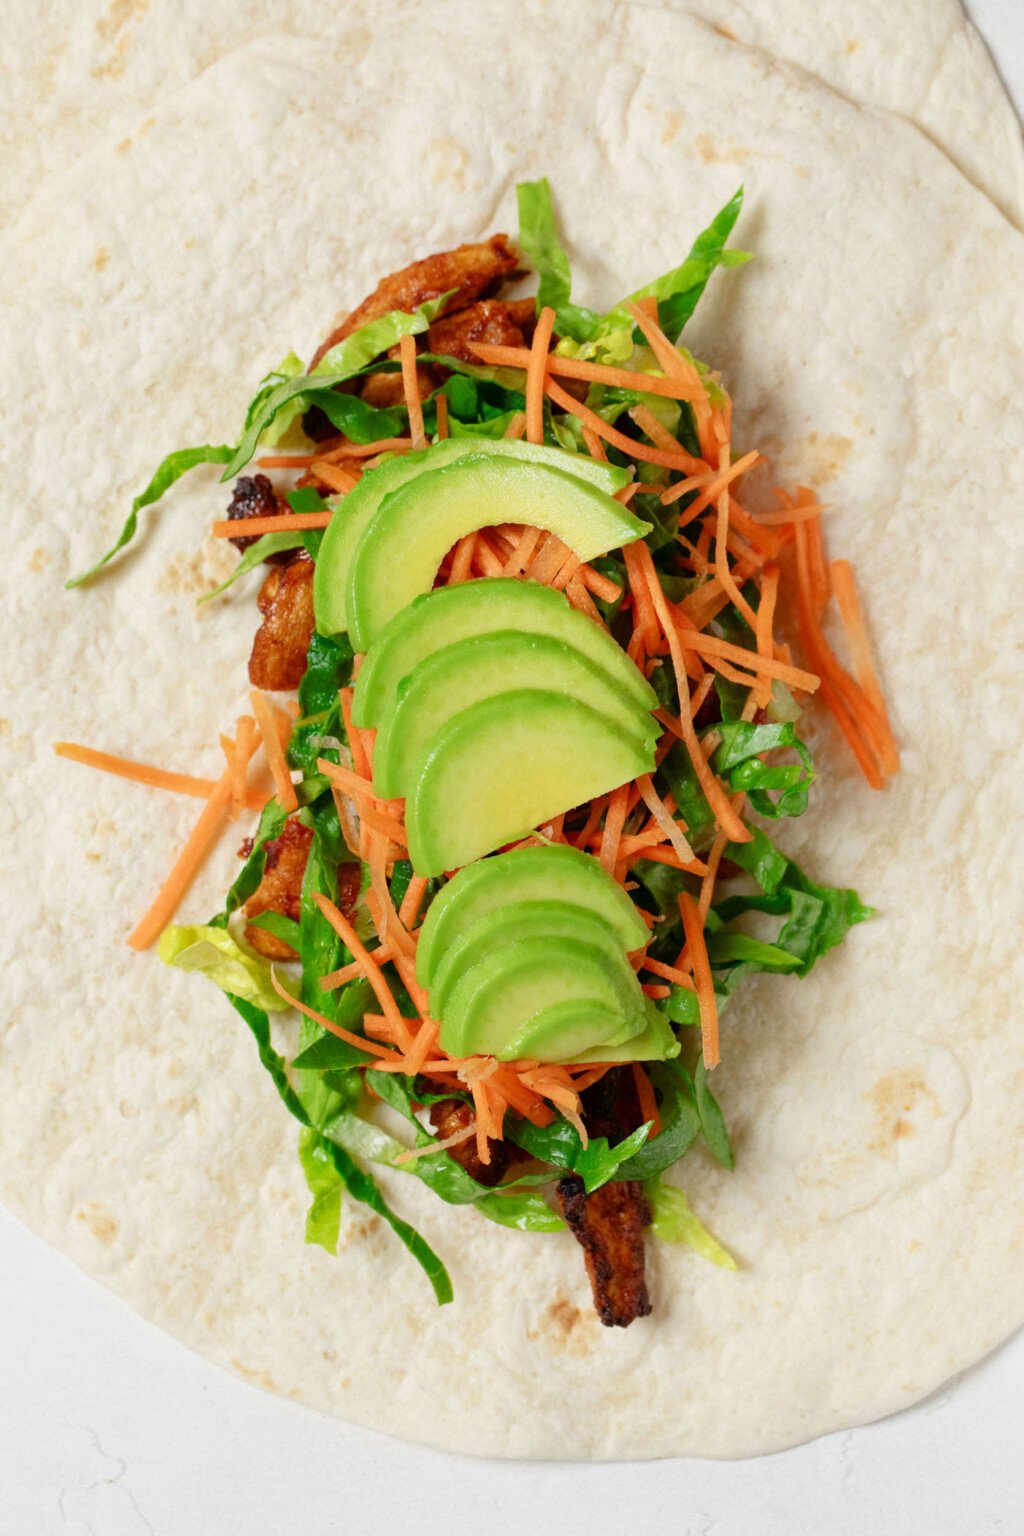 Avocado slices have been layered on top of other fillings for a plant-based “buffalo chicken” wrap.